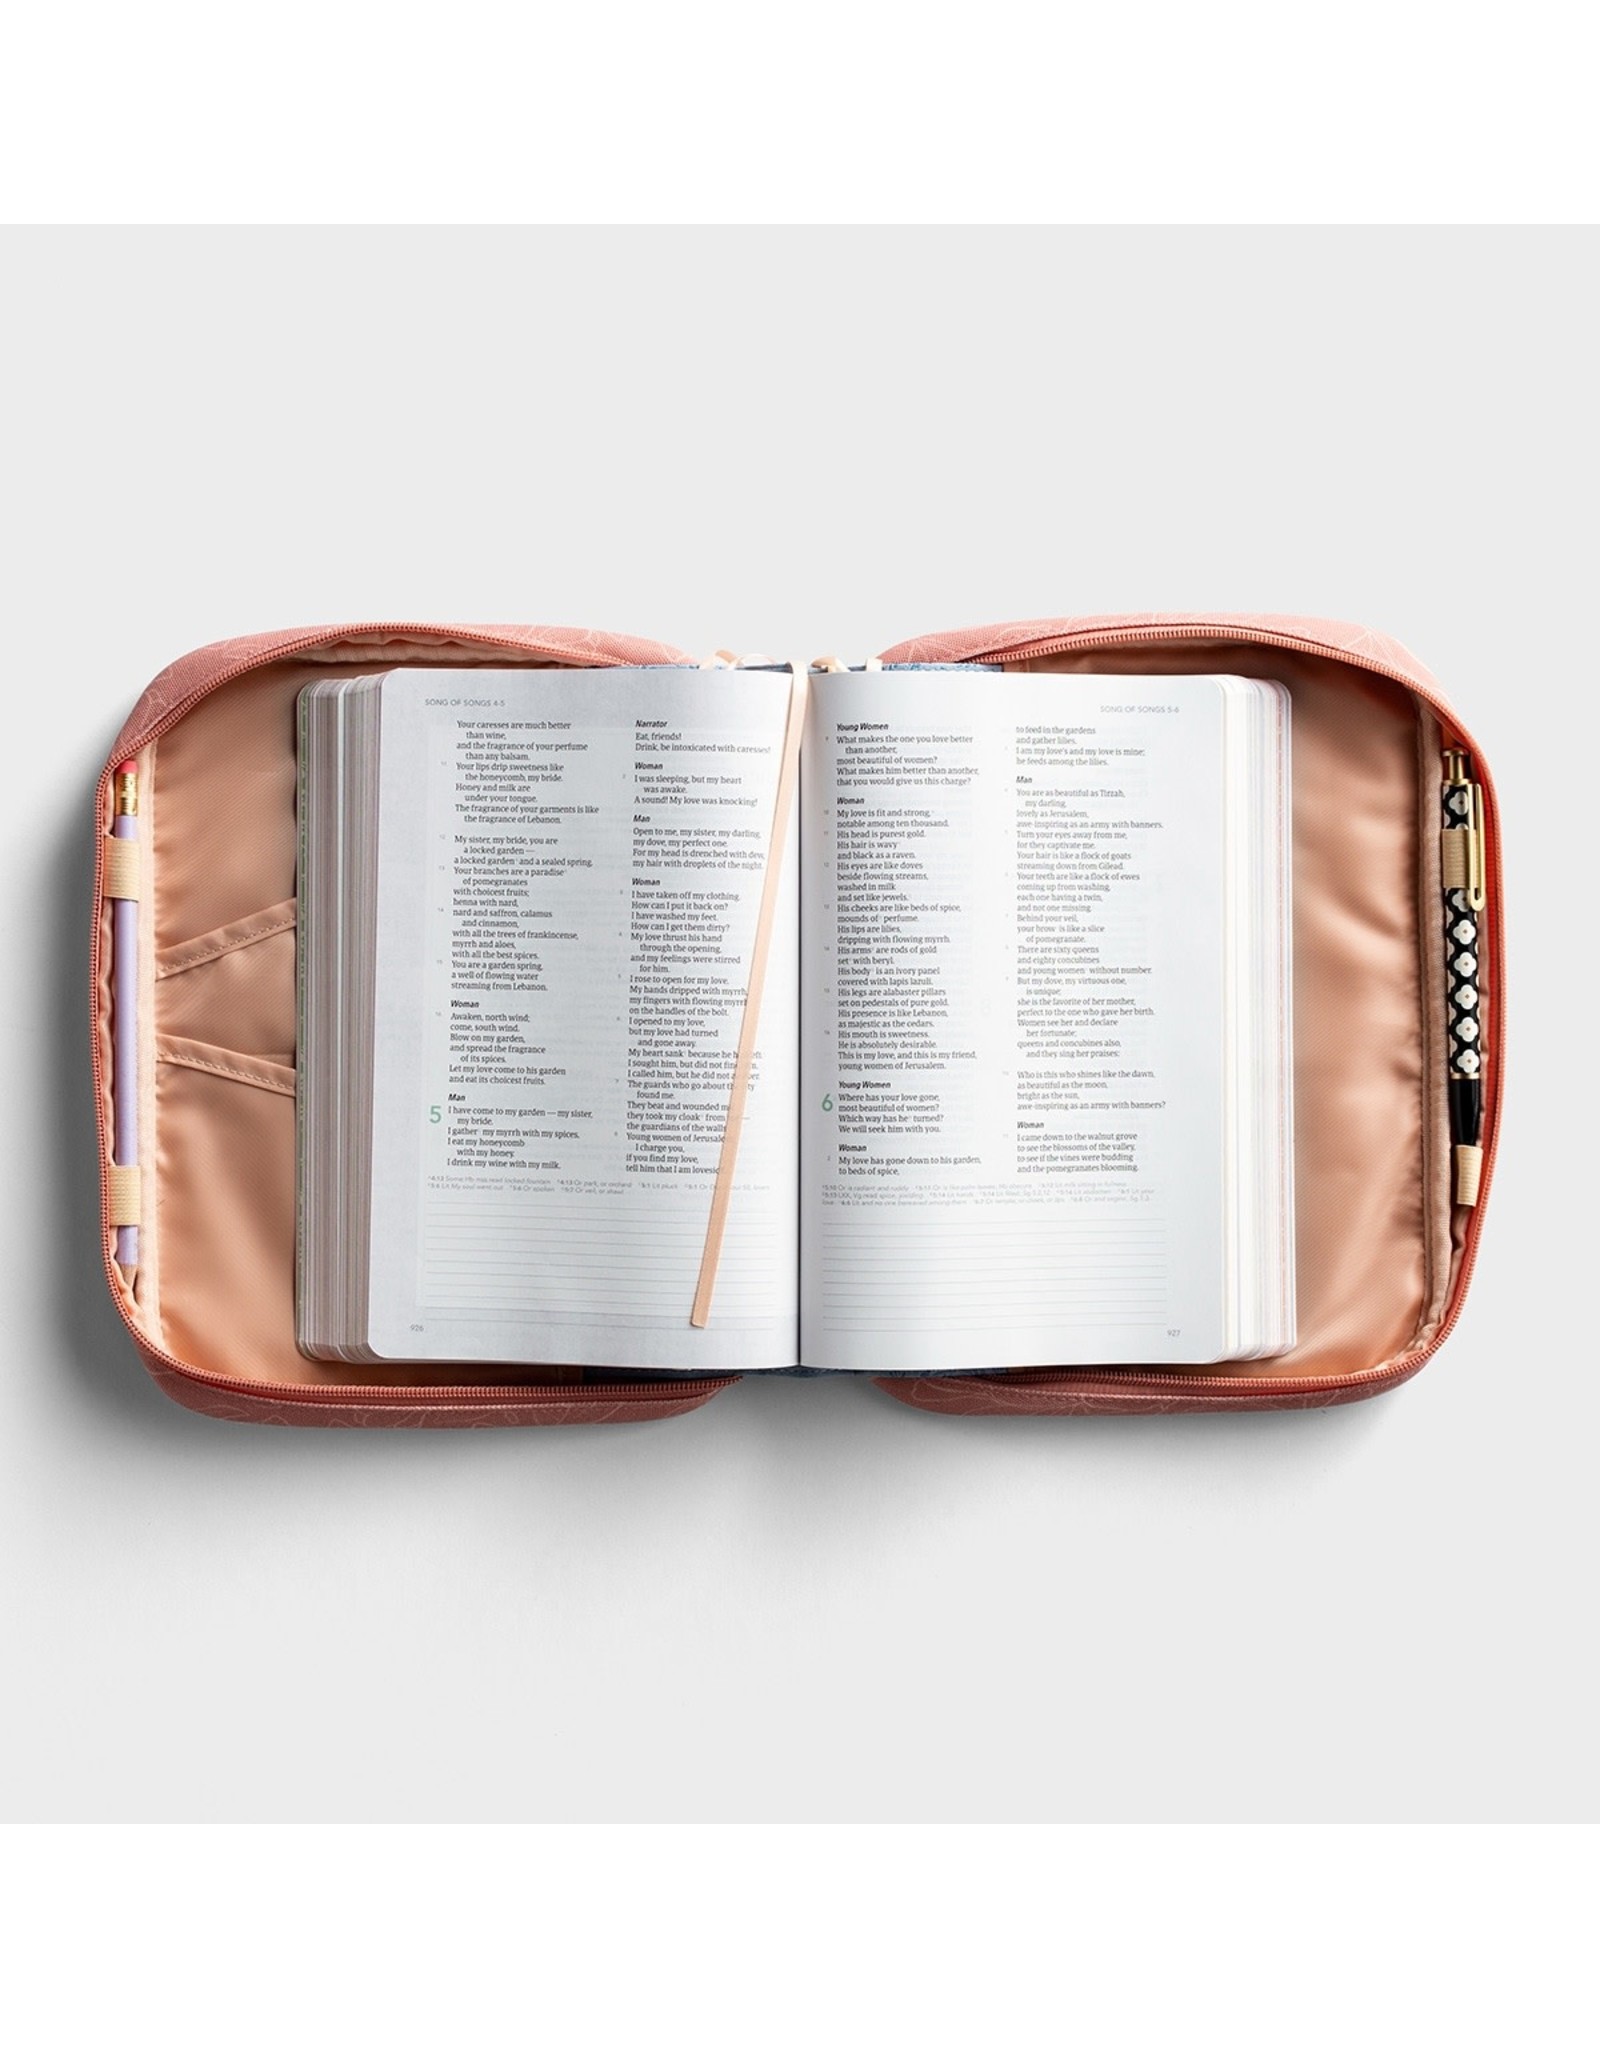 Studio 71 Bible Cover - Grace Upon Grace (Pink)